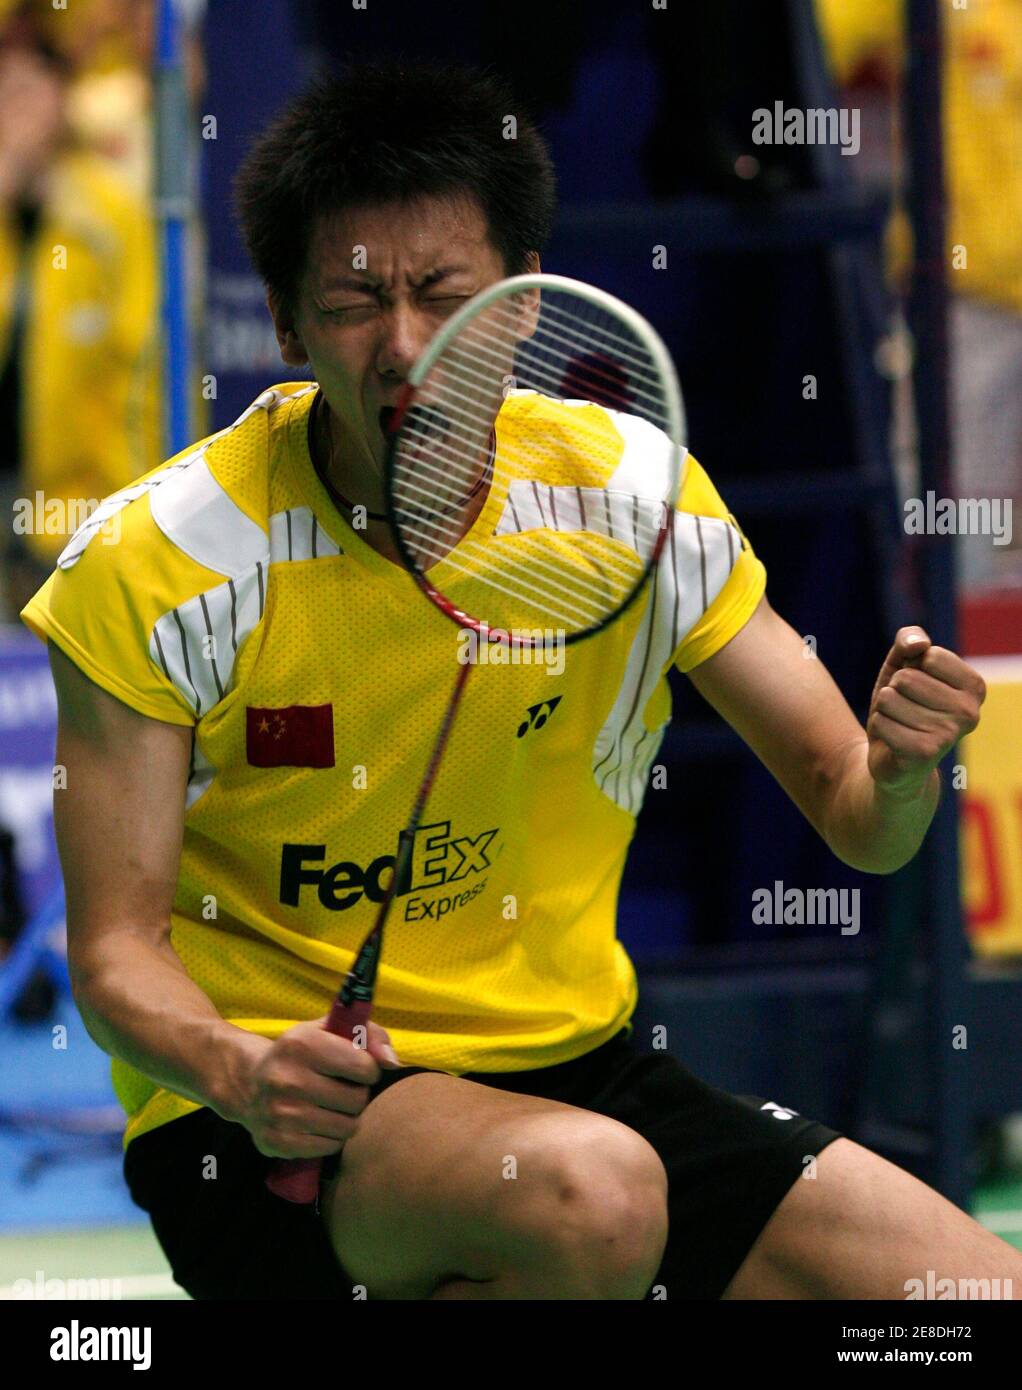 China's Chen Jin reacts after beating Malaysia's Muhammad Hafiz Hashim during the semifinal of the Thomas Cup badminton championships in Jakarta May 16, 2008. REUTERS/Beawiharta (INDONESIA) Stock Photo